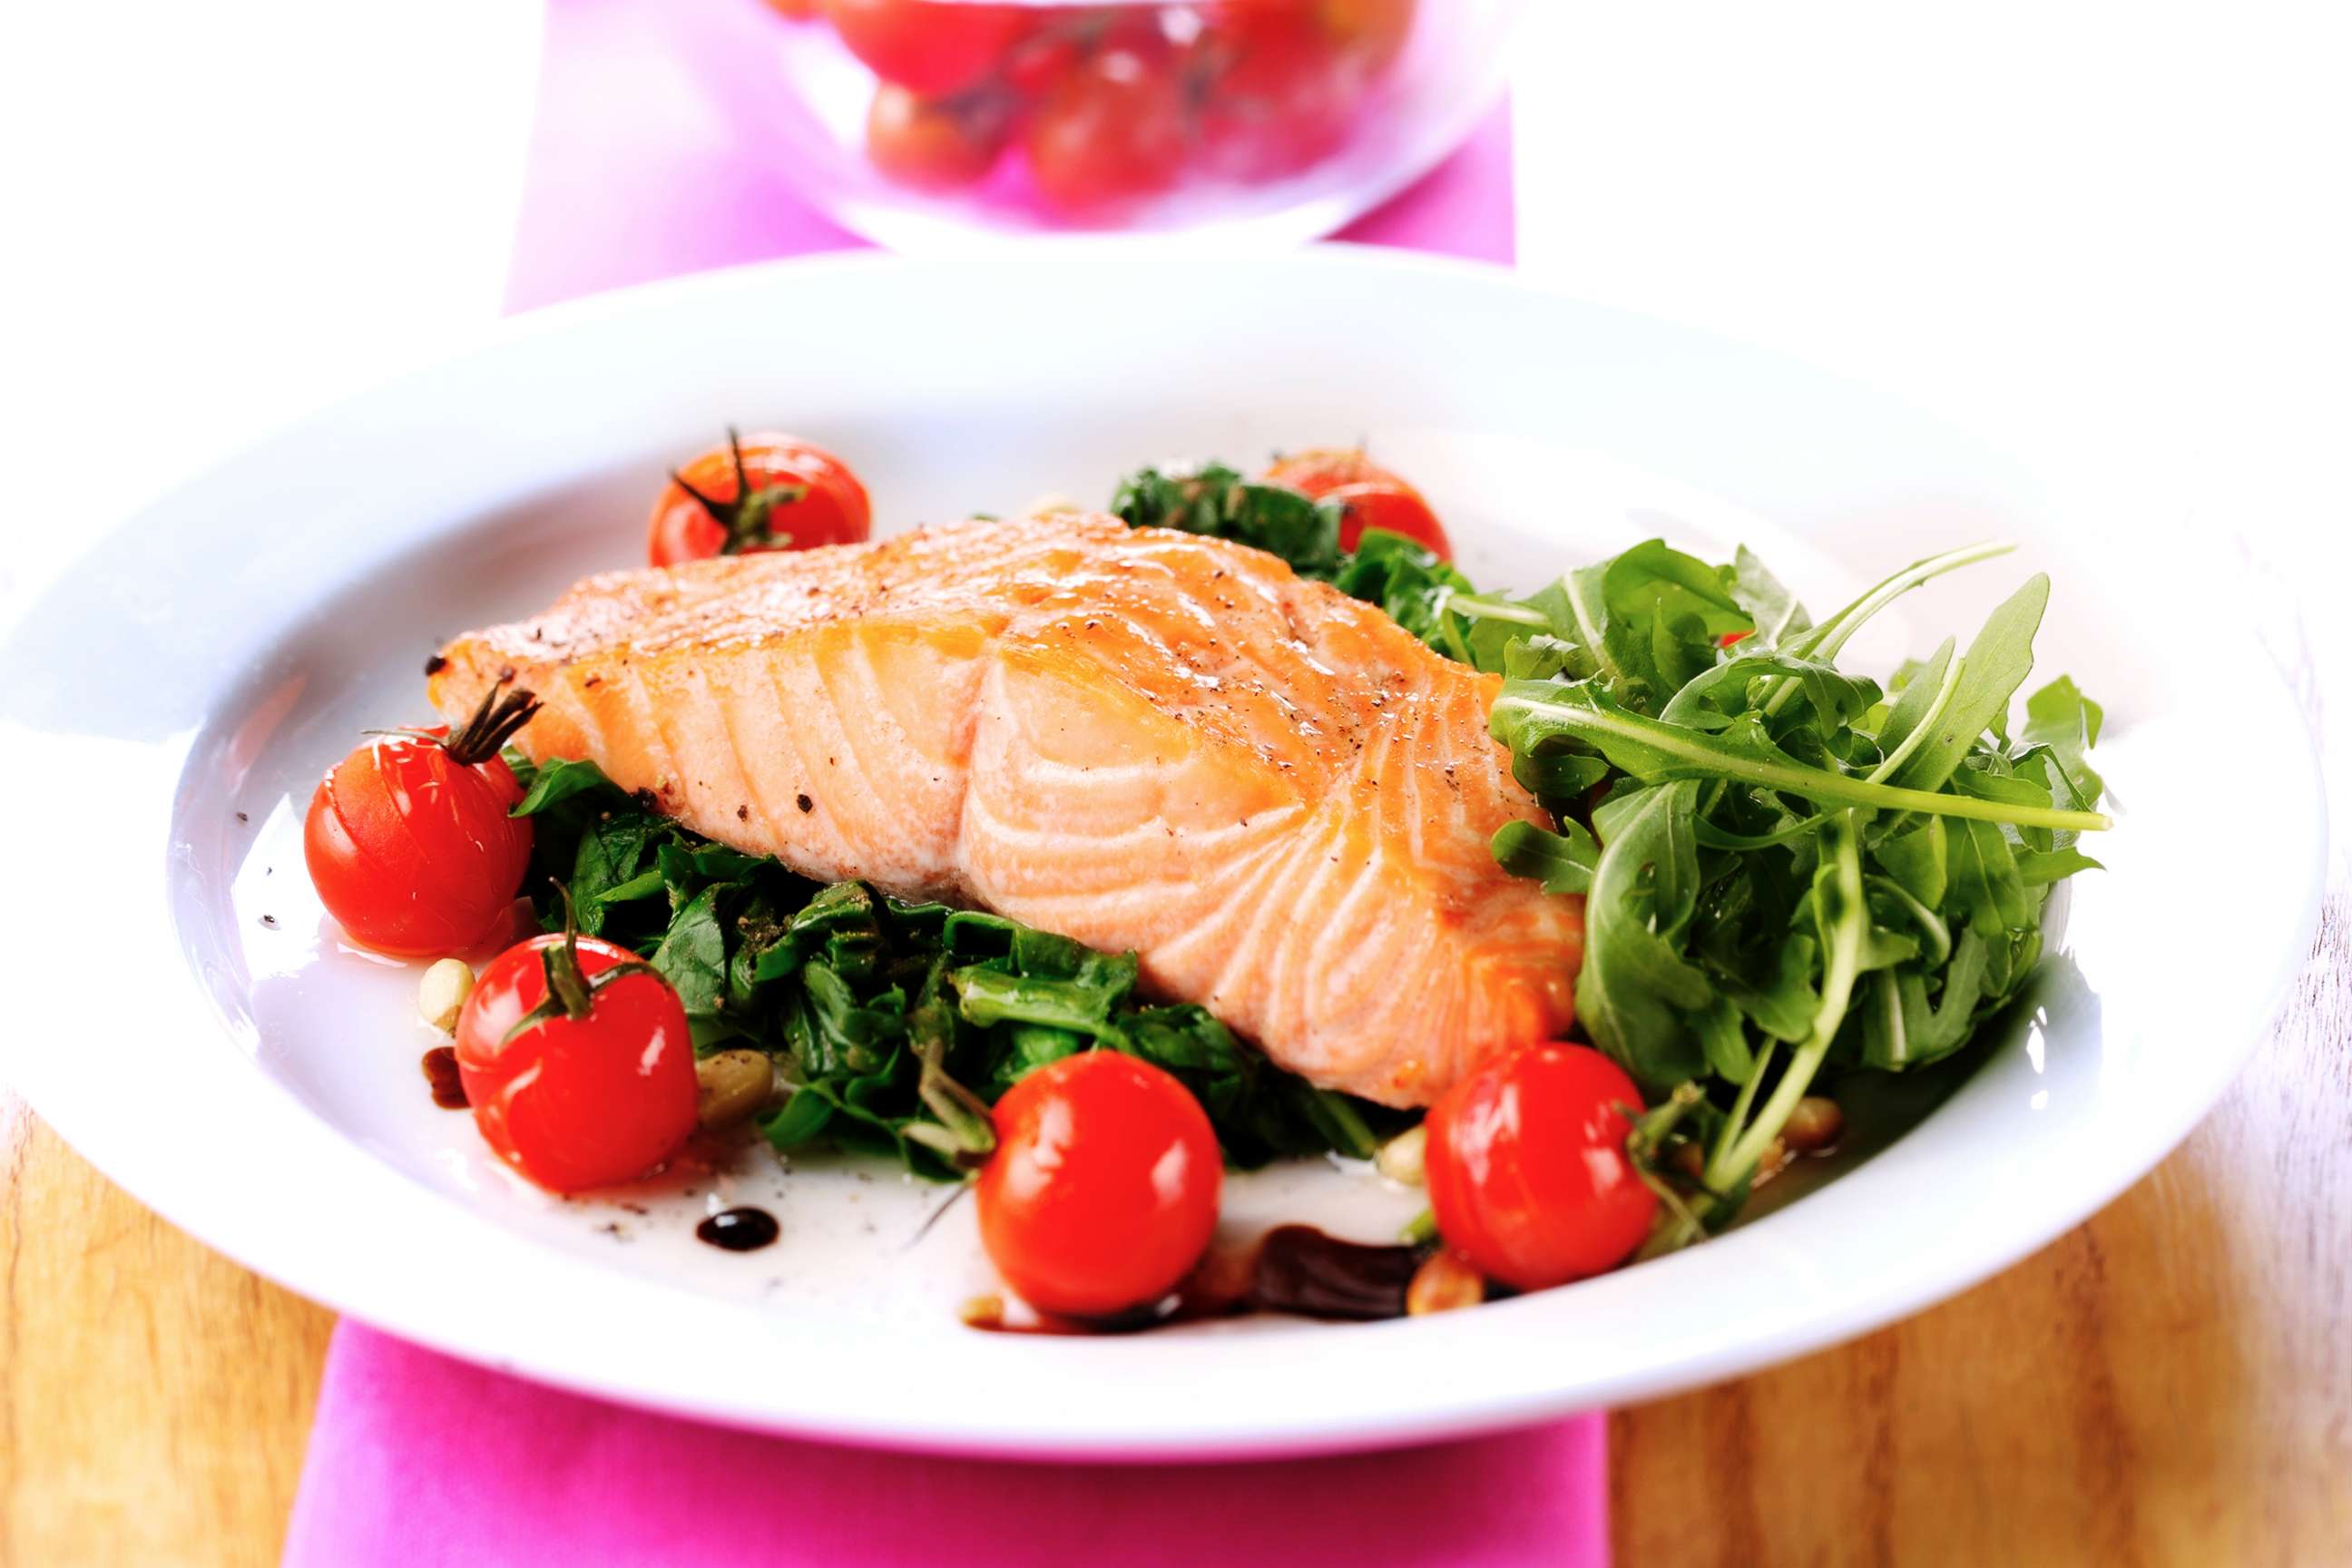 PHOTO: Salmon is served on a bed of spinach in this undated stock photo.